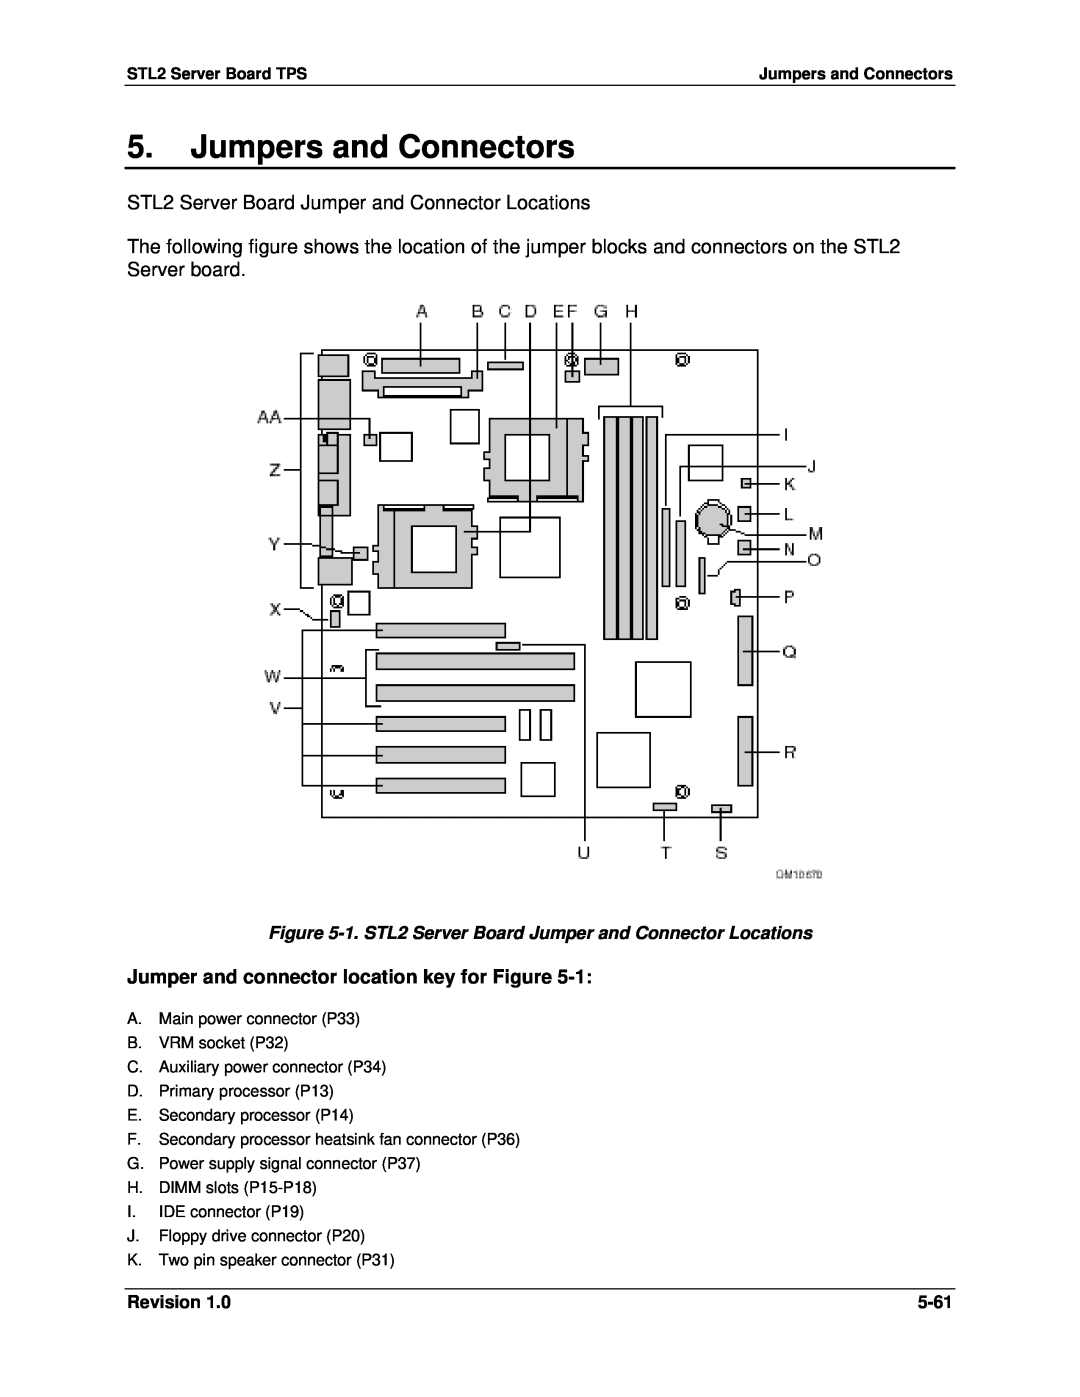 Intel STL2 manual Jumpers and Connectors, Jumper and connector location key for Figure, Revision, 5-61 